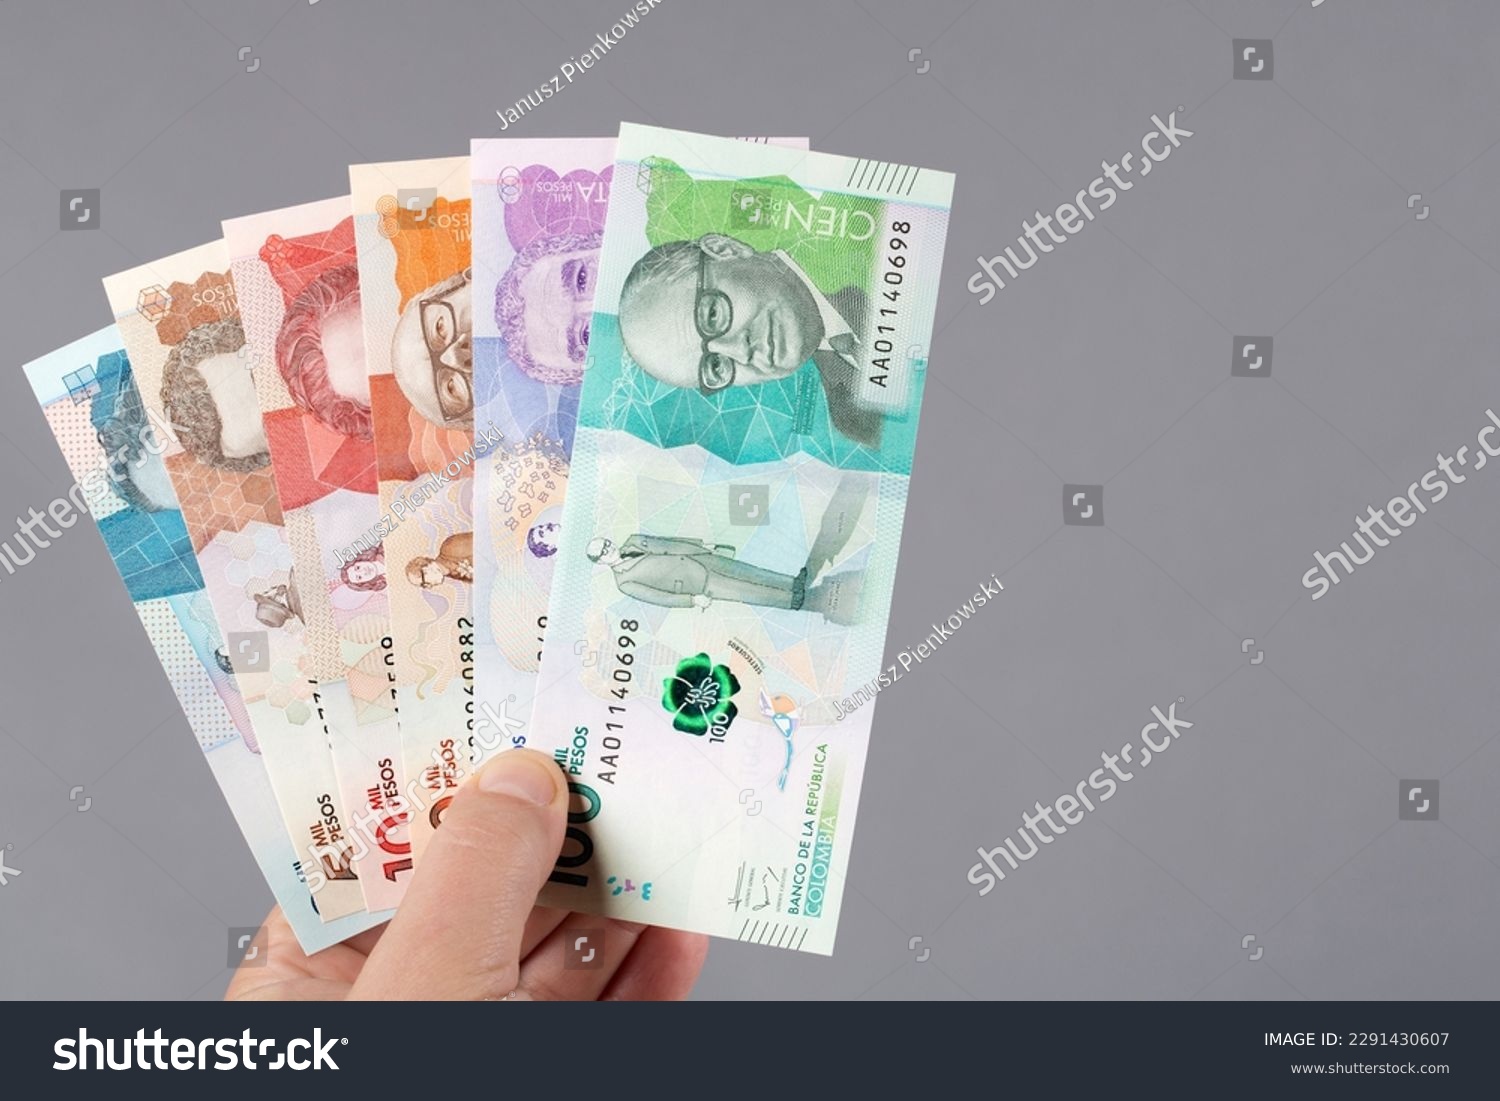 Colombian money - Pesos in the hand on a gray background  #2291430607